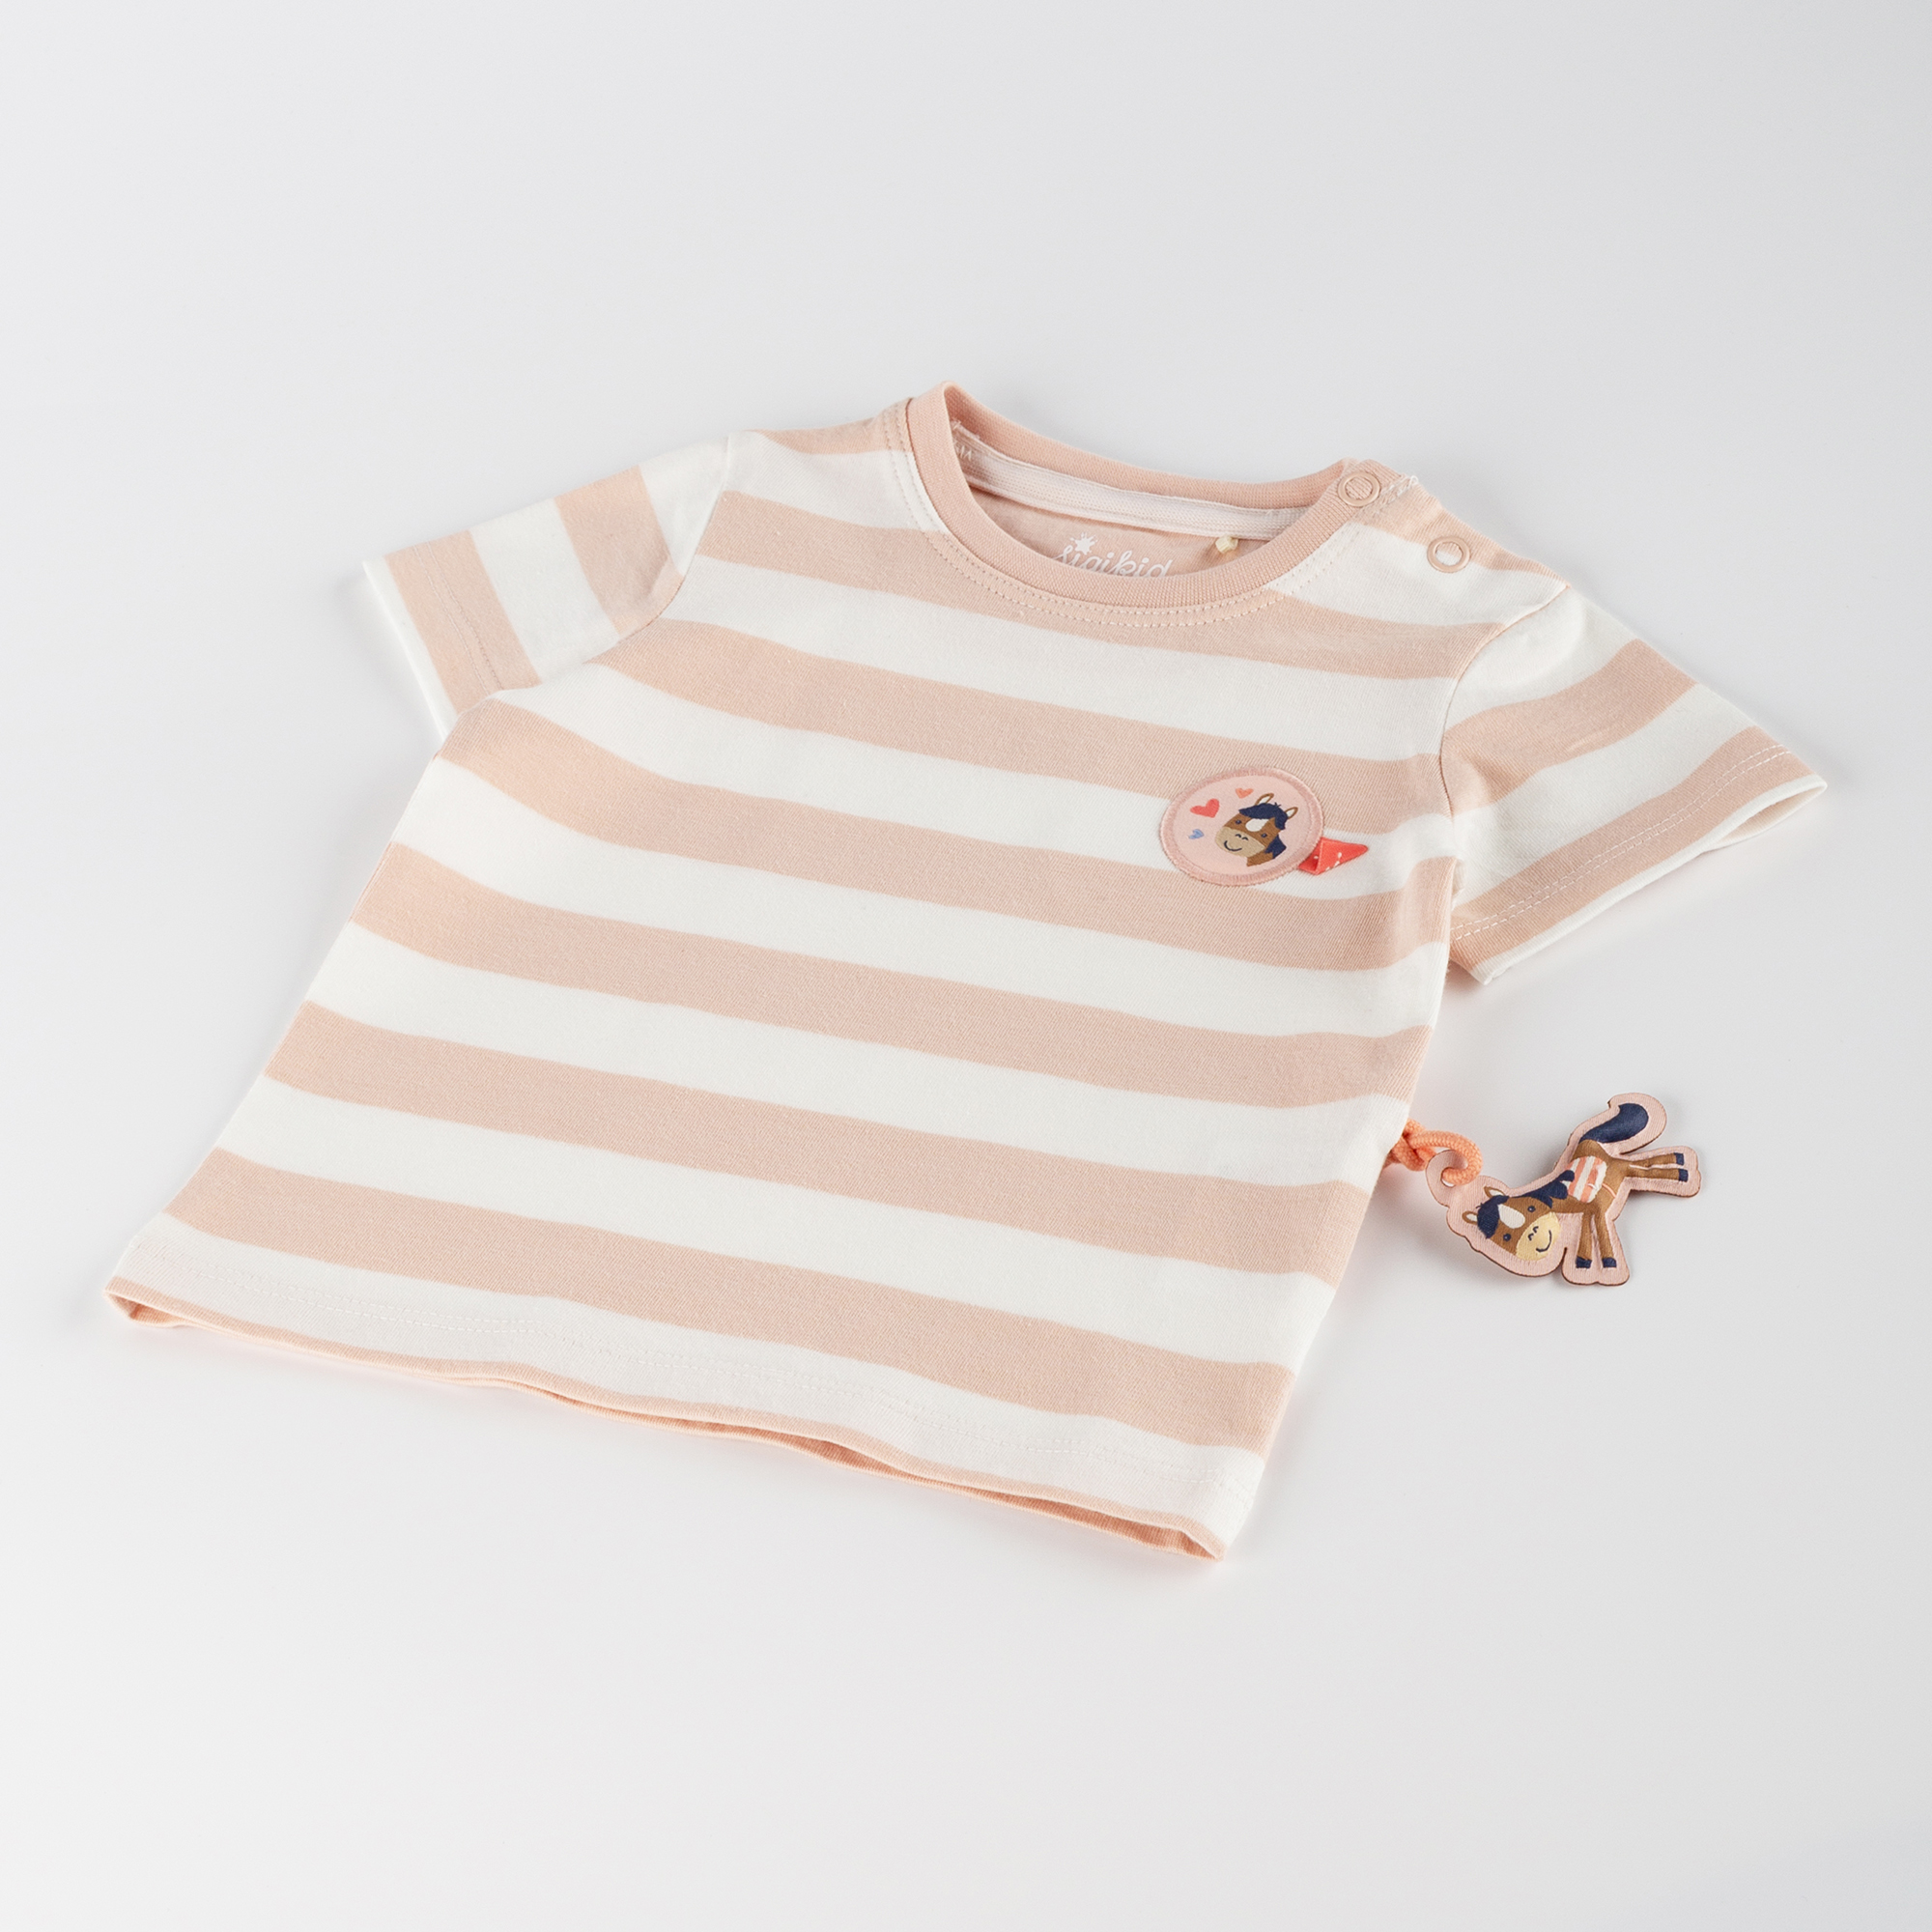 Striped baby T-shirt Funny Horse, cream/pale pink